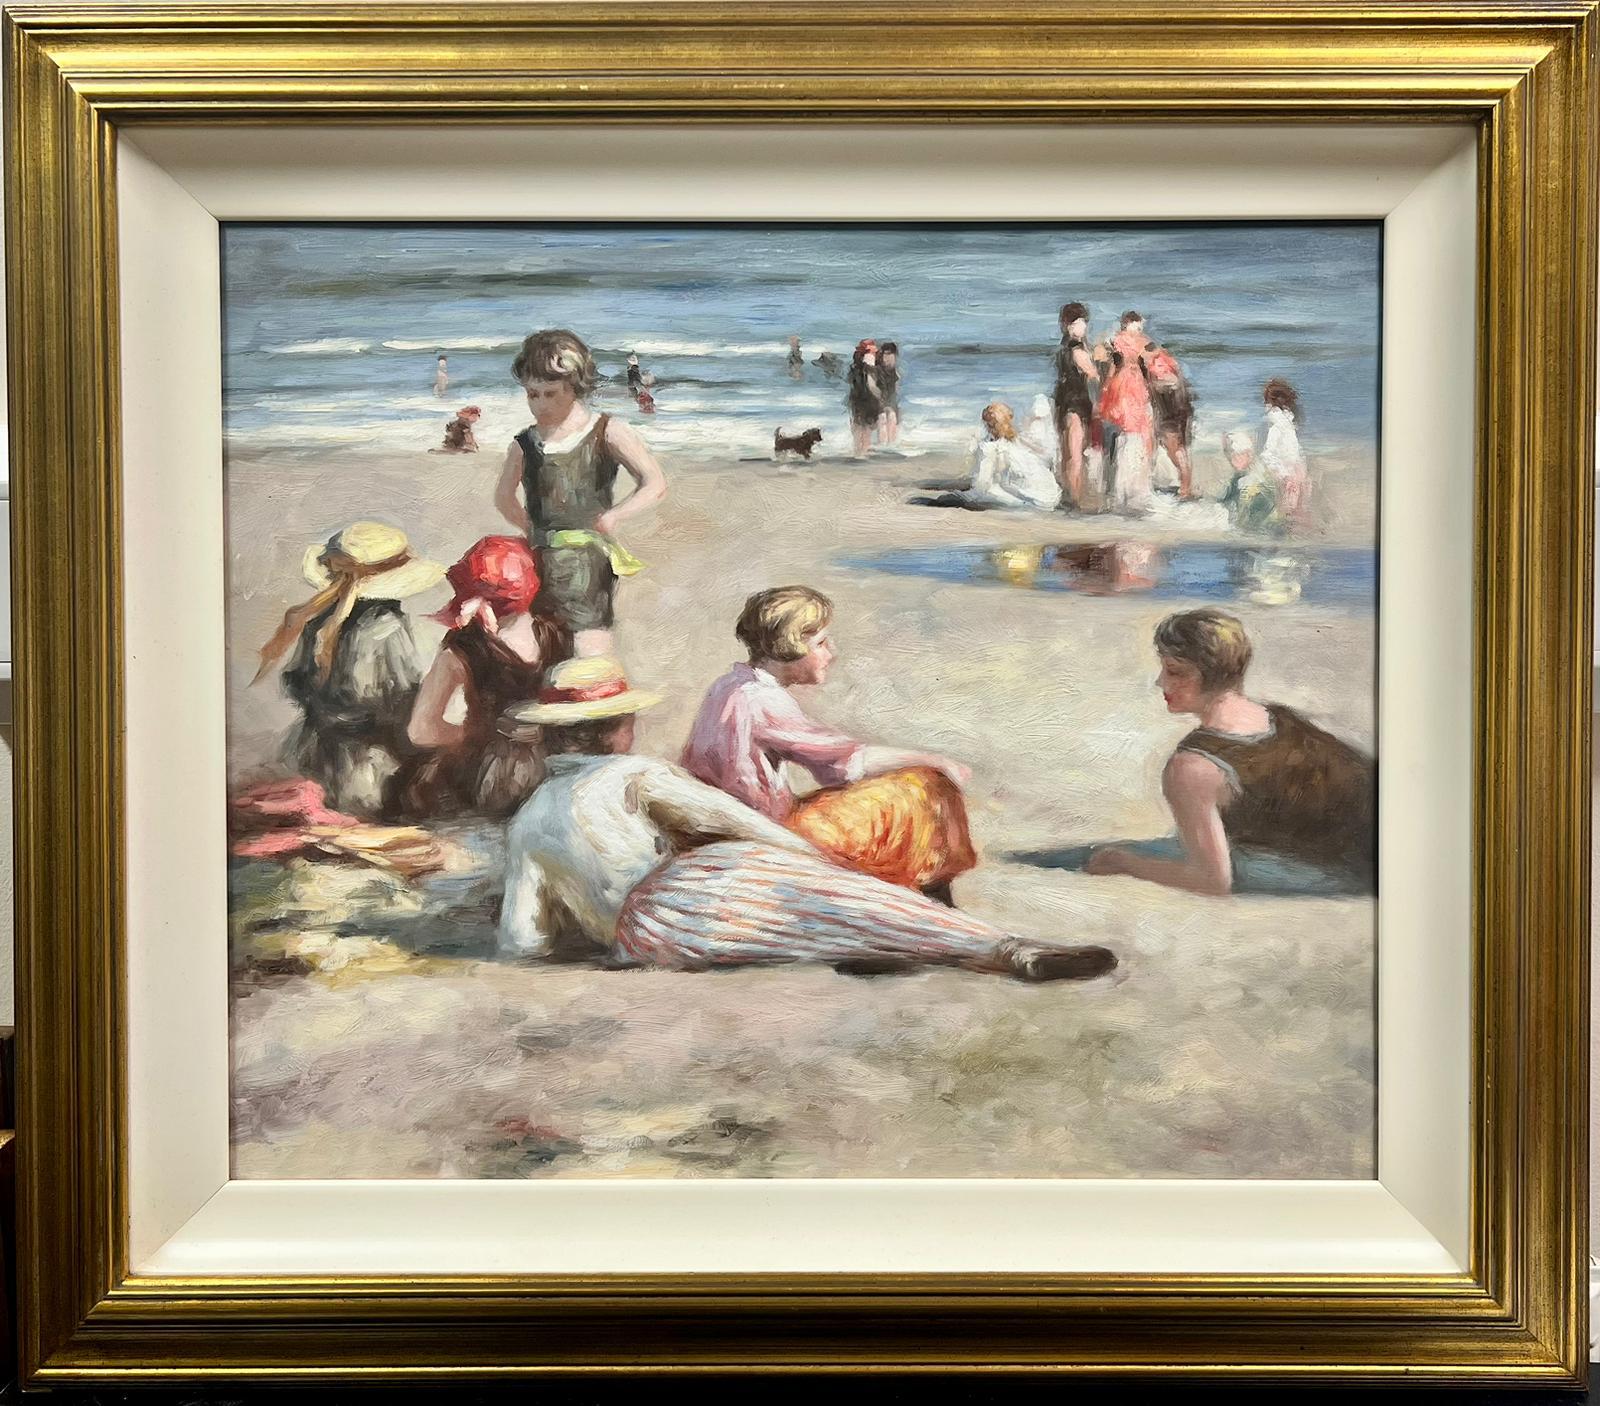 A Day on the Beach
oil painting on board, framed
inscribed verso
framed: 28 x 32 inches
board: 20 x 27 inches
provenance: the artists estate, France
condition: overall very good,